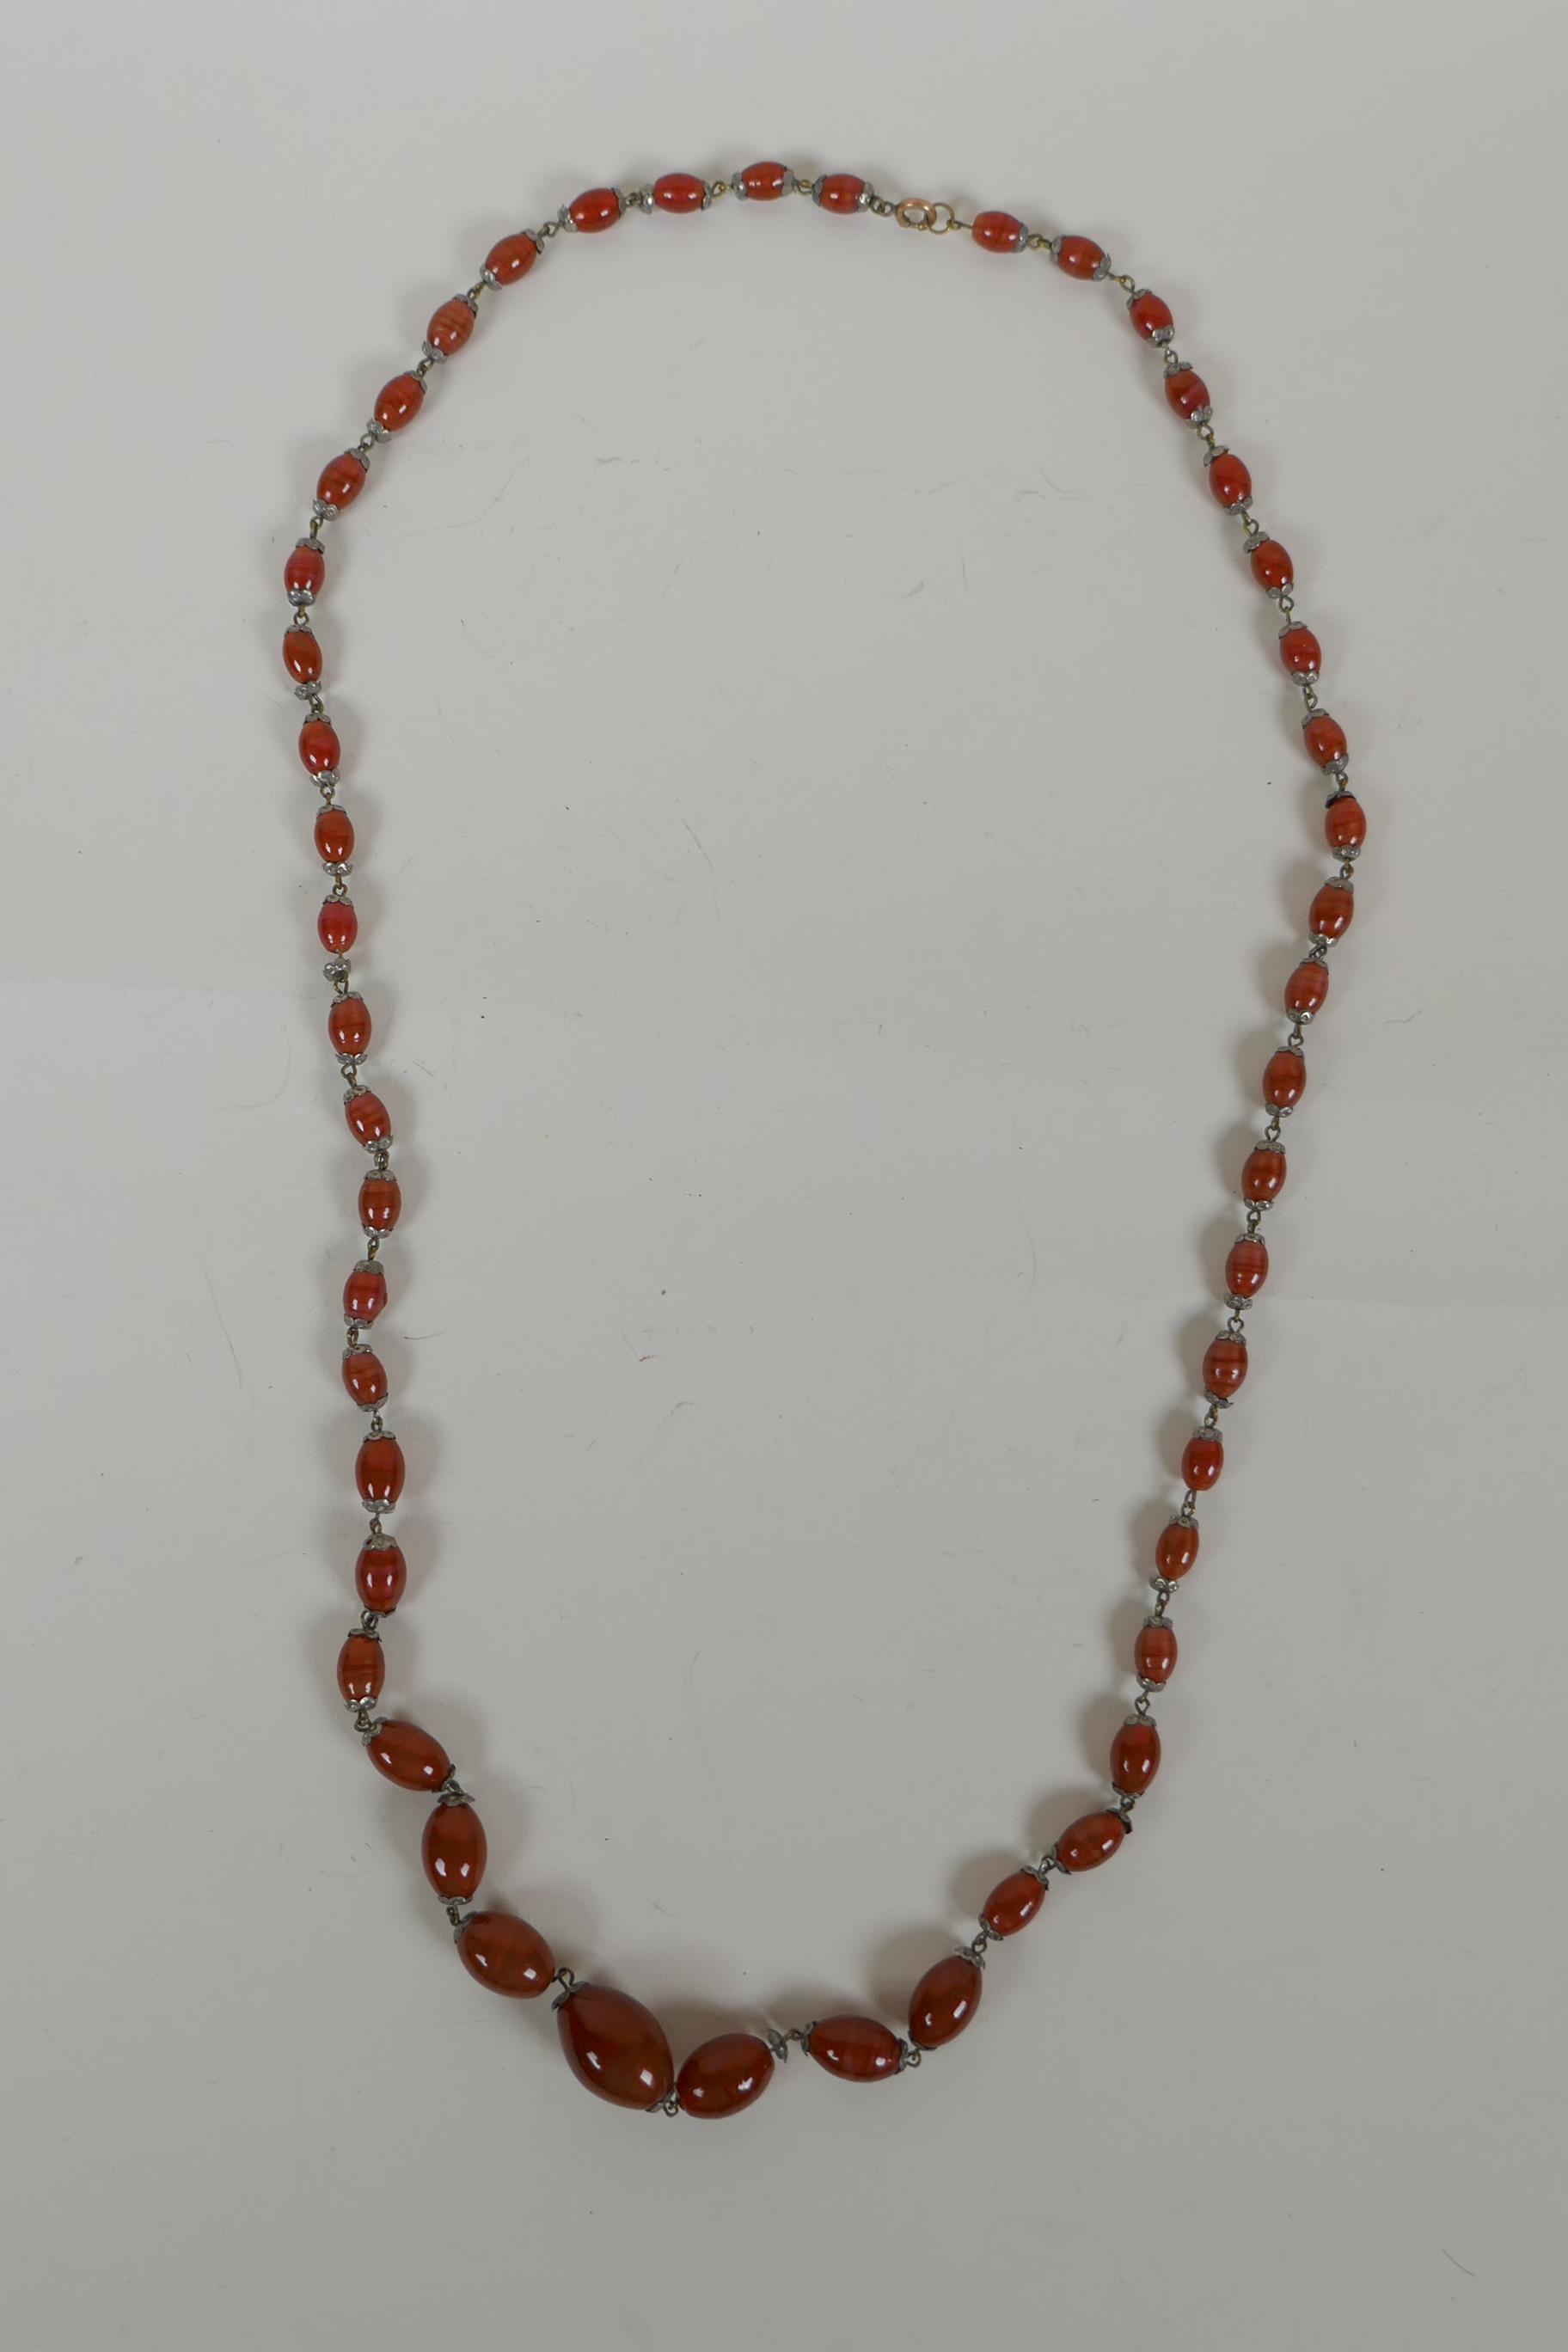 An antique graduated amber swirled glass necklace, 78cm long